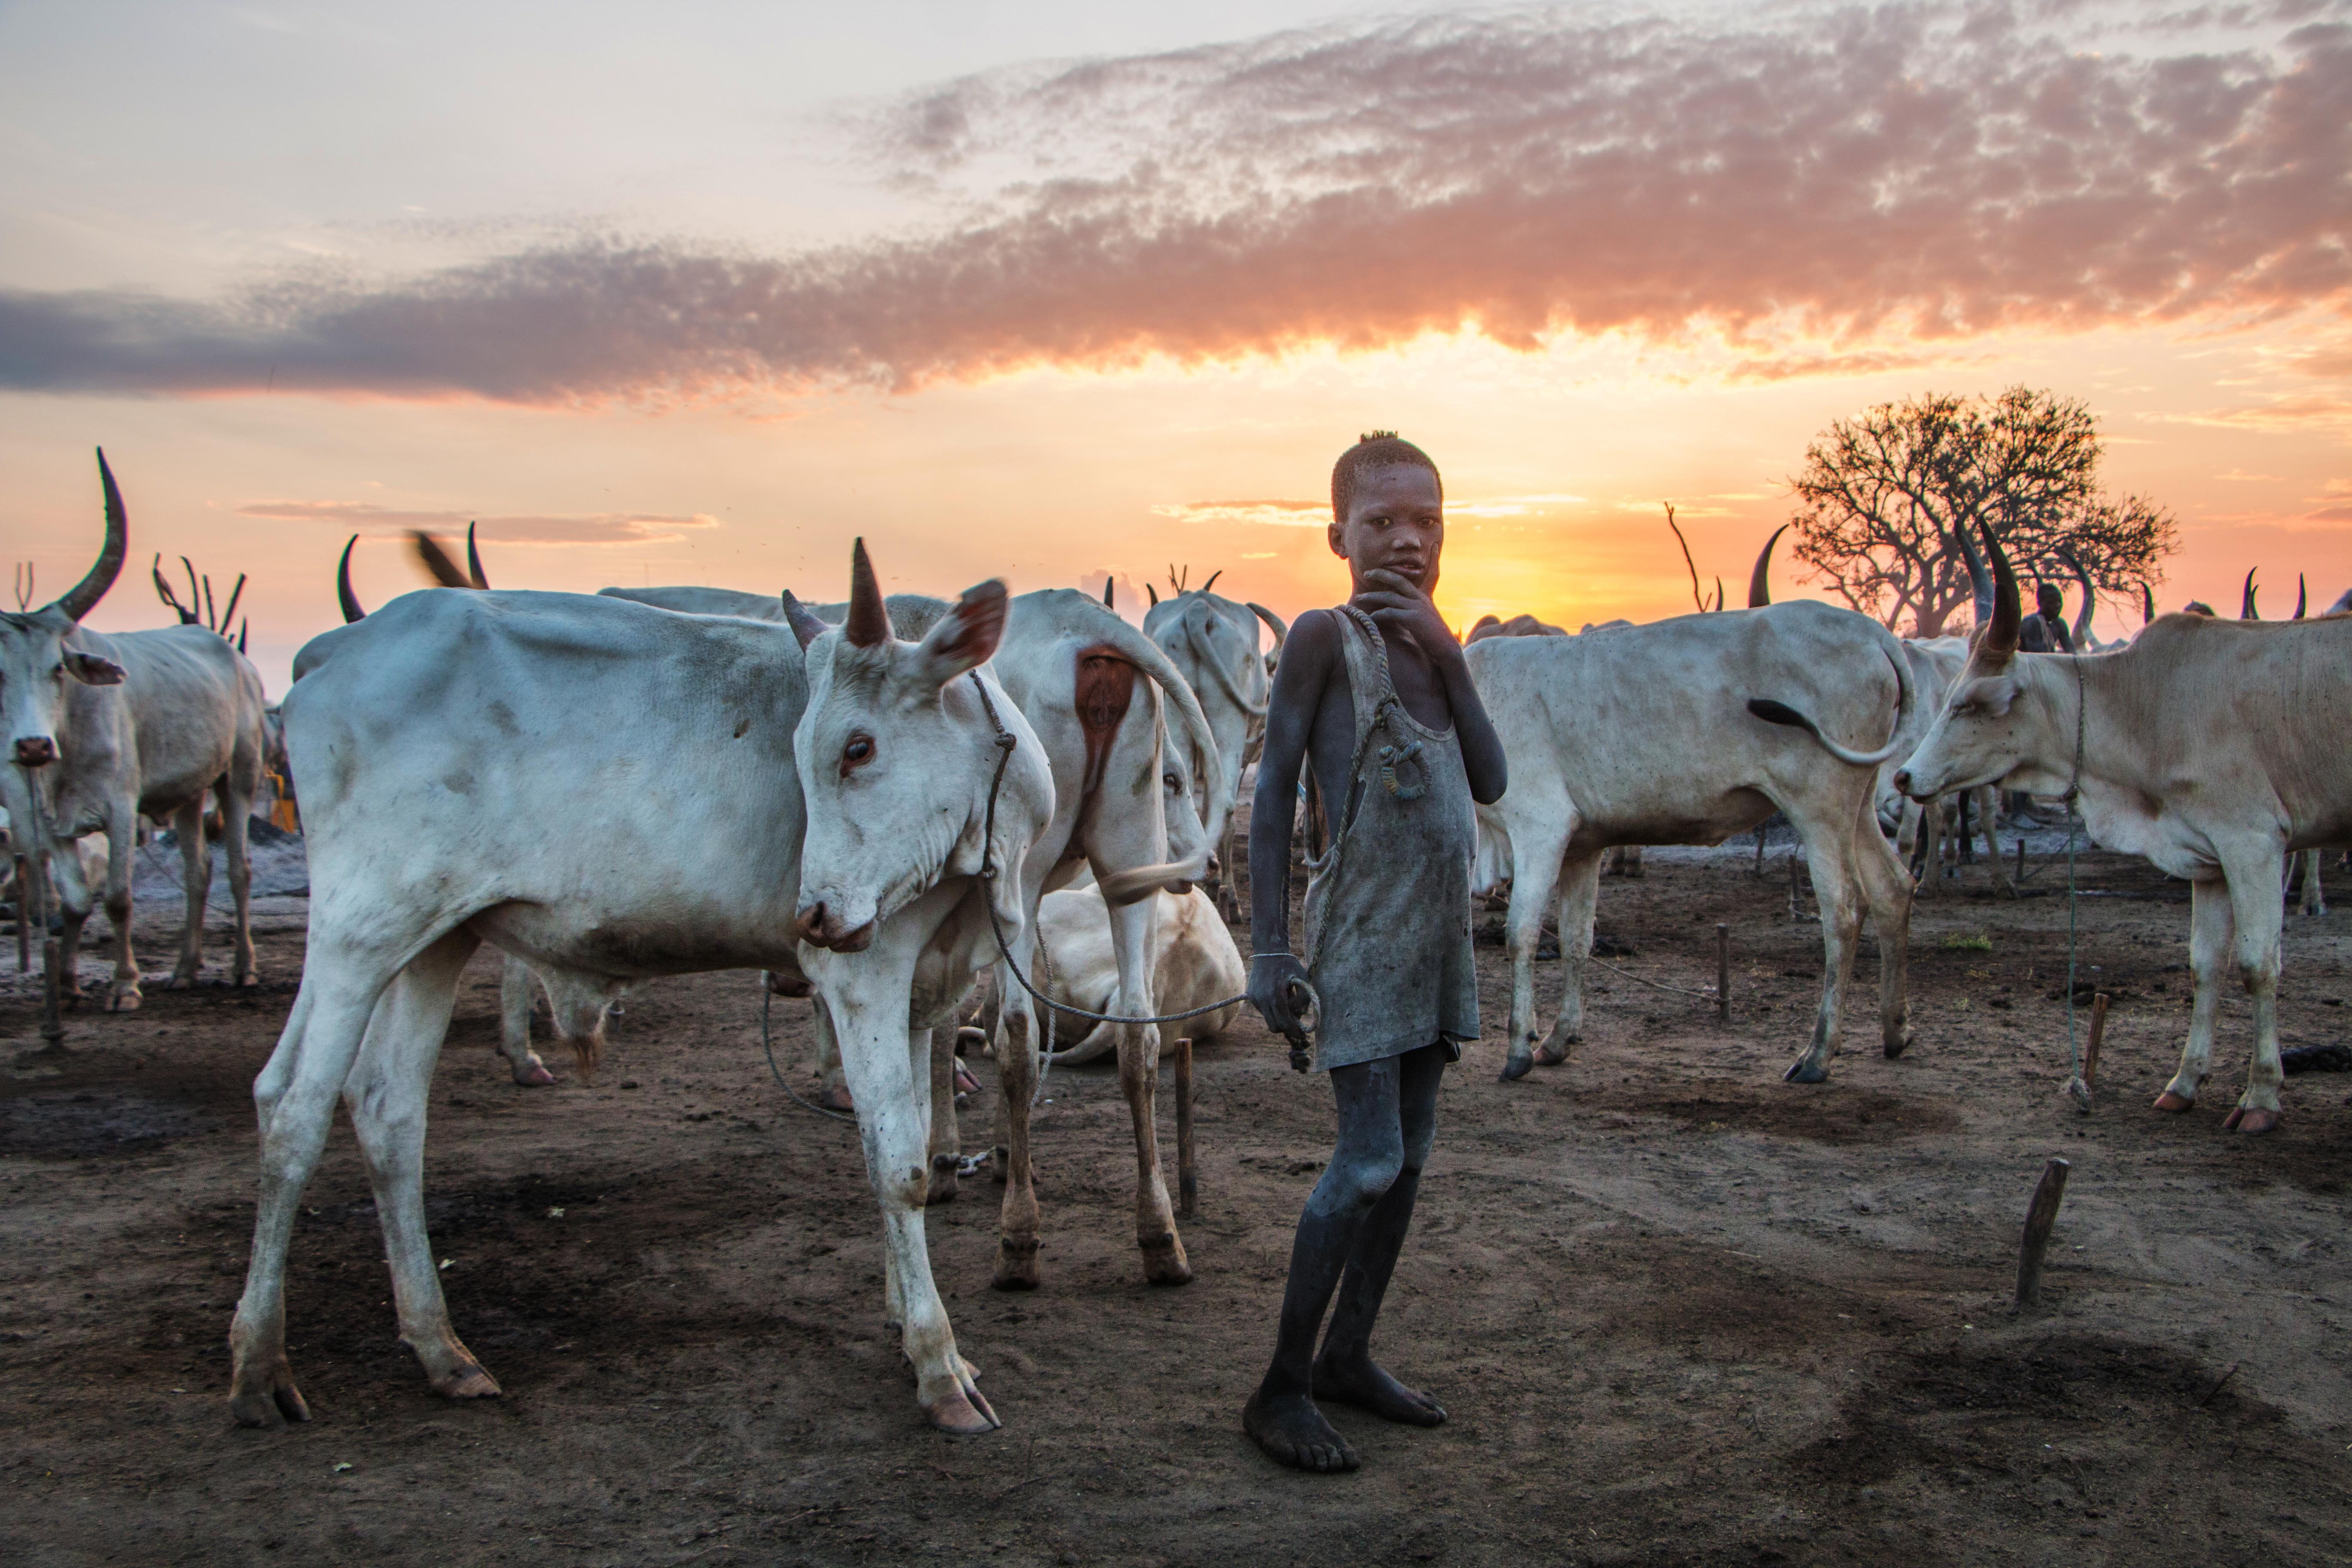 From childhood Mundari men pick a favorite bull to grow up with and take care of. When a young man gets married his favorite bull becomes a valued gift to his bride's family.